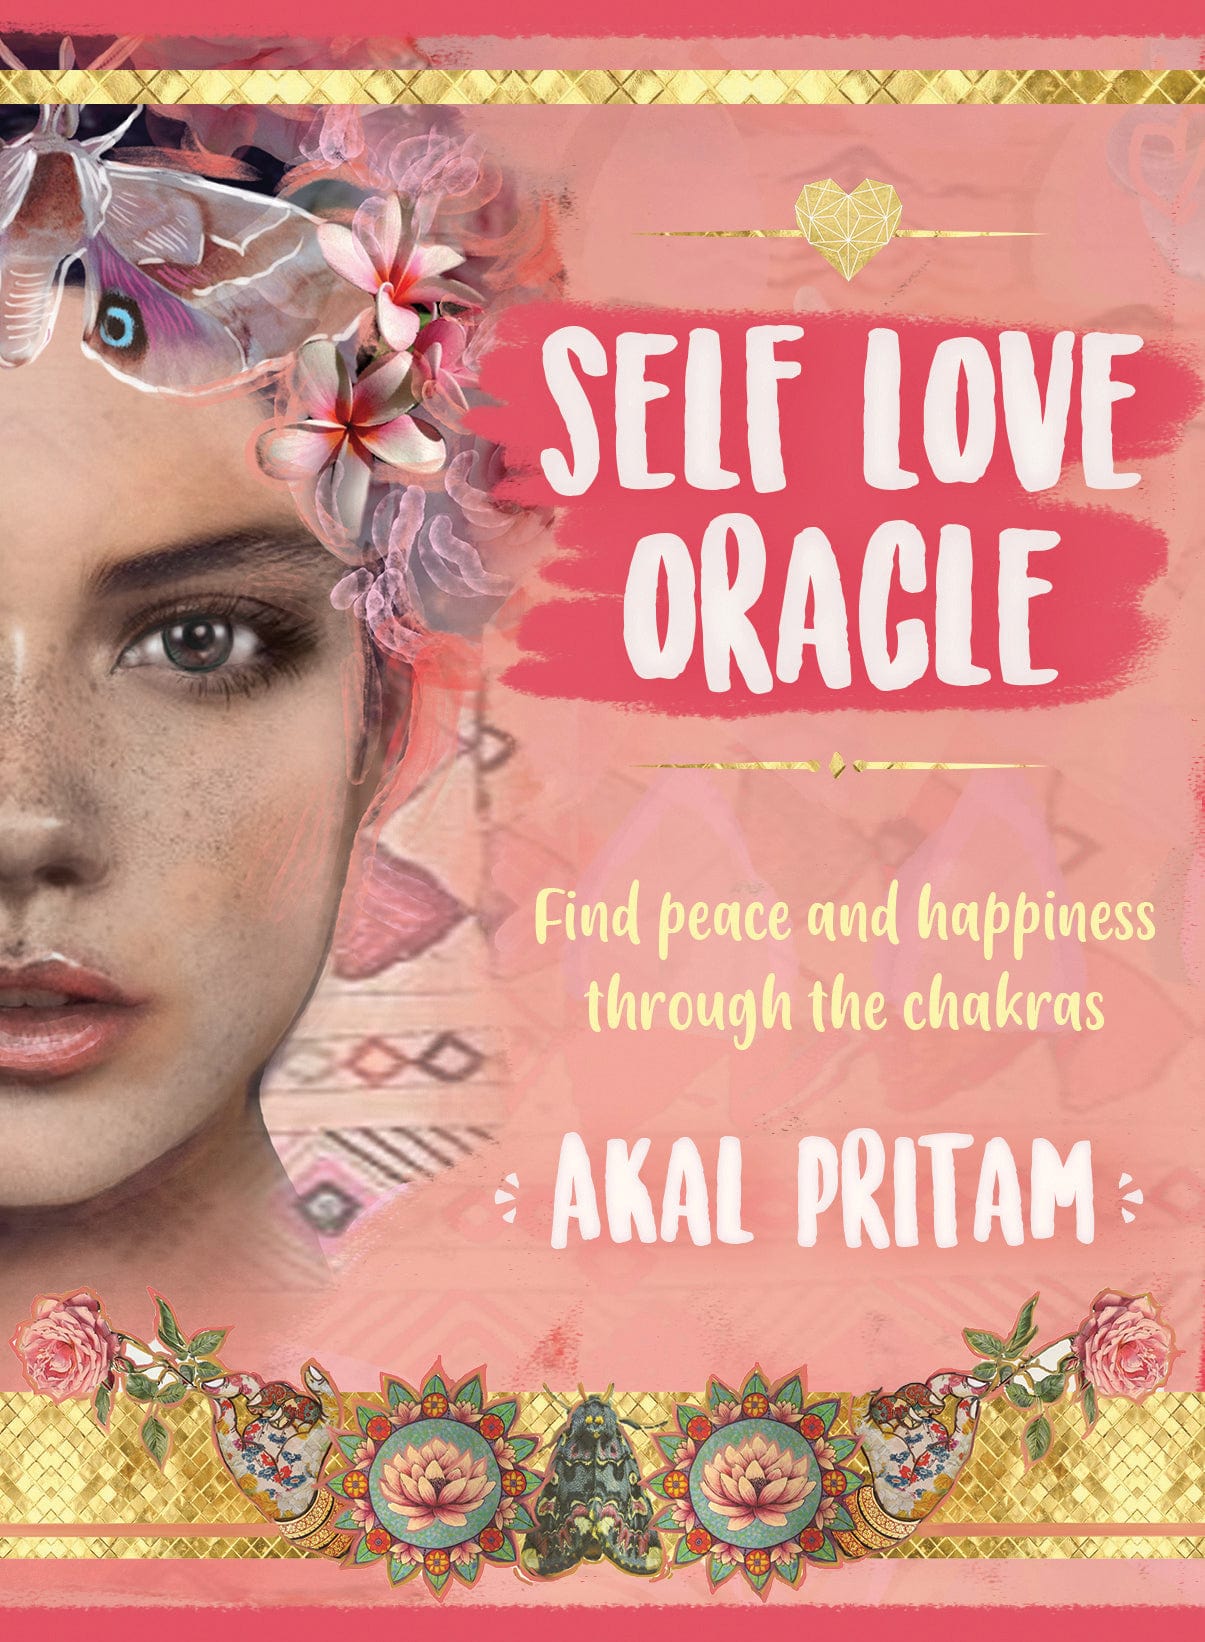 Self Love Oracle - Find Peace and Happiness through the Chakras by Akal Pritam